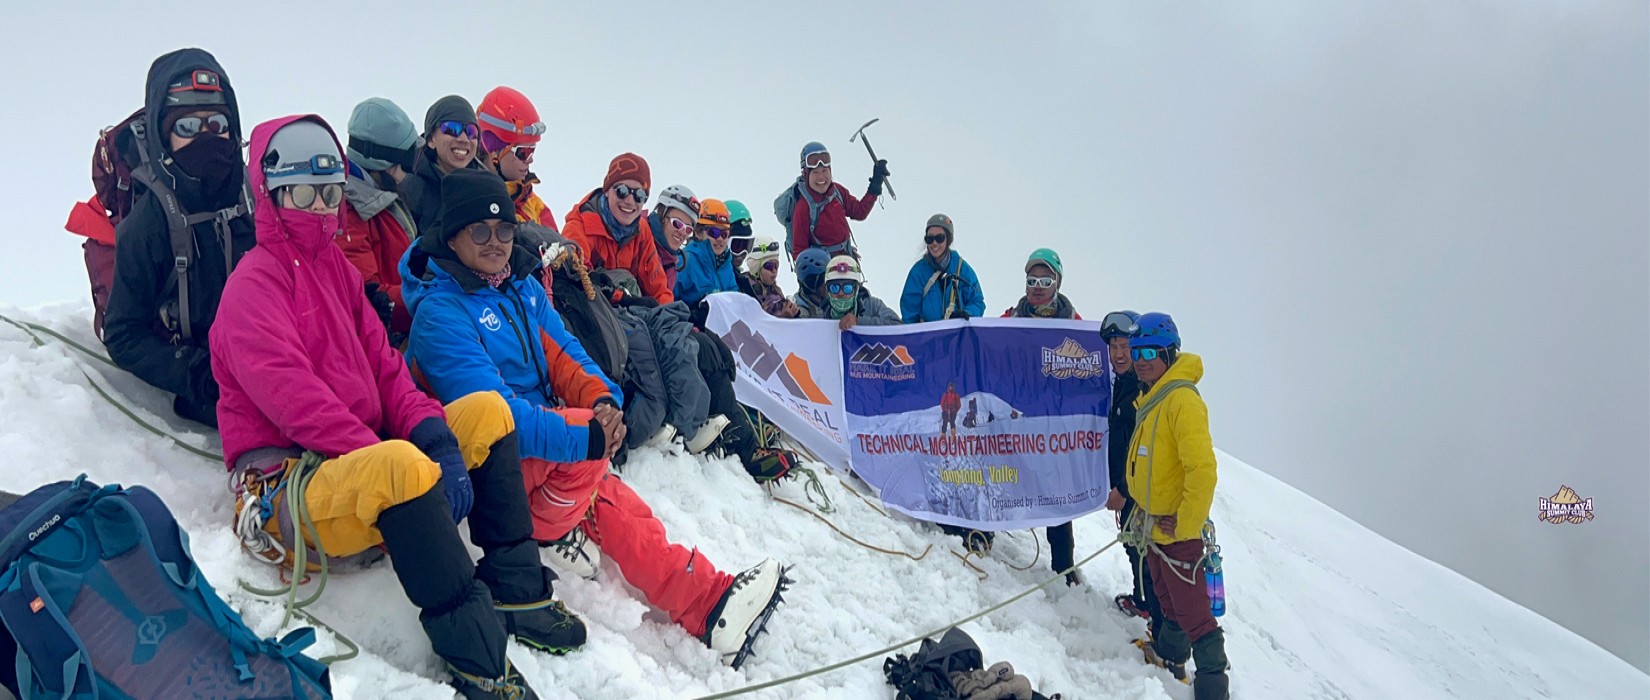 Scout Peak 5750m Summit of Himalayan Mountaineering Course Team 